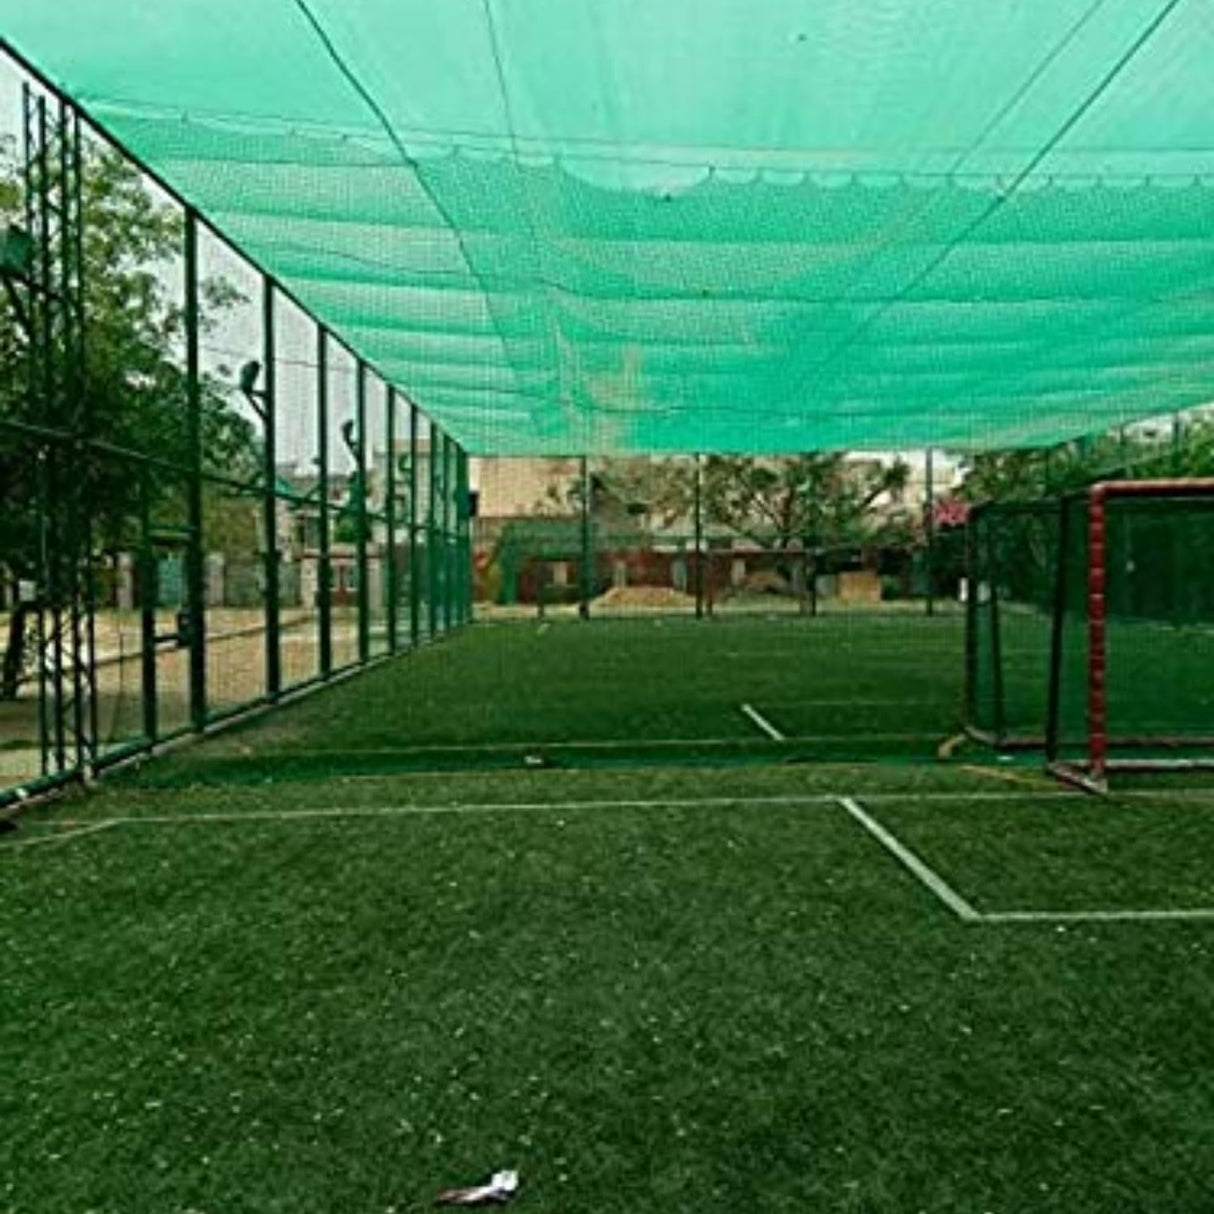 Singhal Stabilized Agro Green House Net Garden Shade - 3X20 M - Green (3x20 Meter) HDPE 50% UV Protected Multipurpose with Attached Eyelets on Every Meter